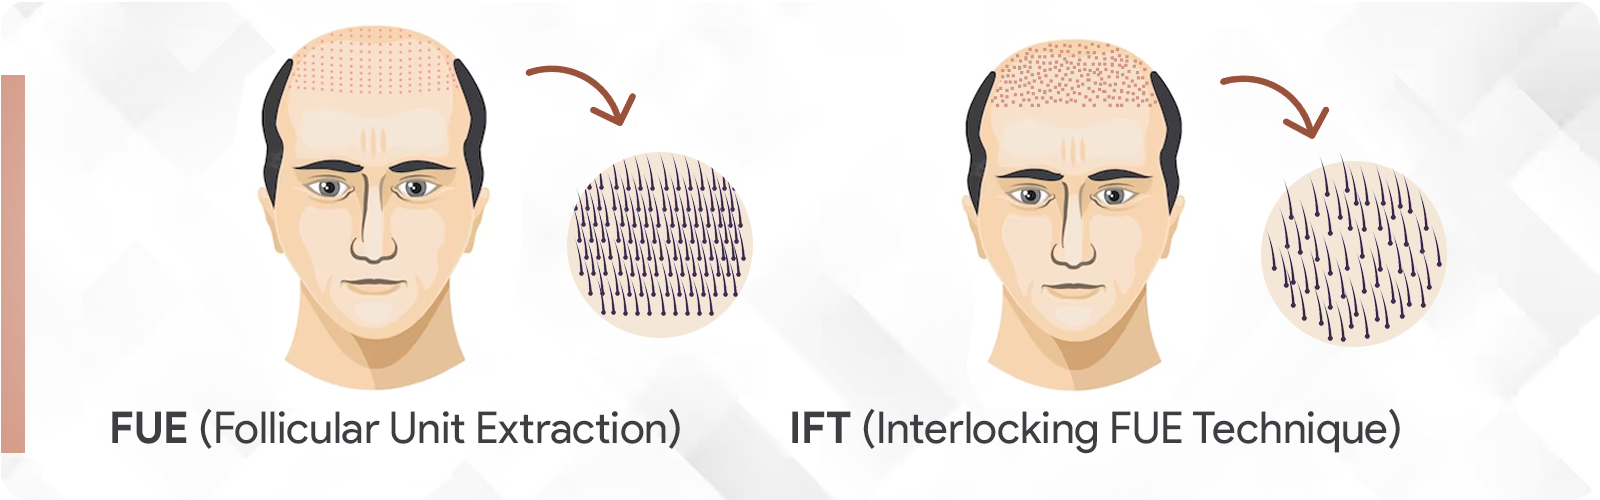 Interlocking fue technique: Natural Hair Results with IFT Technique